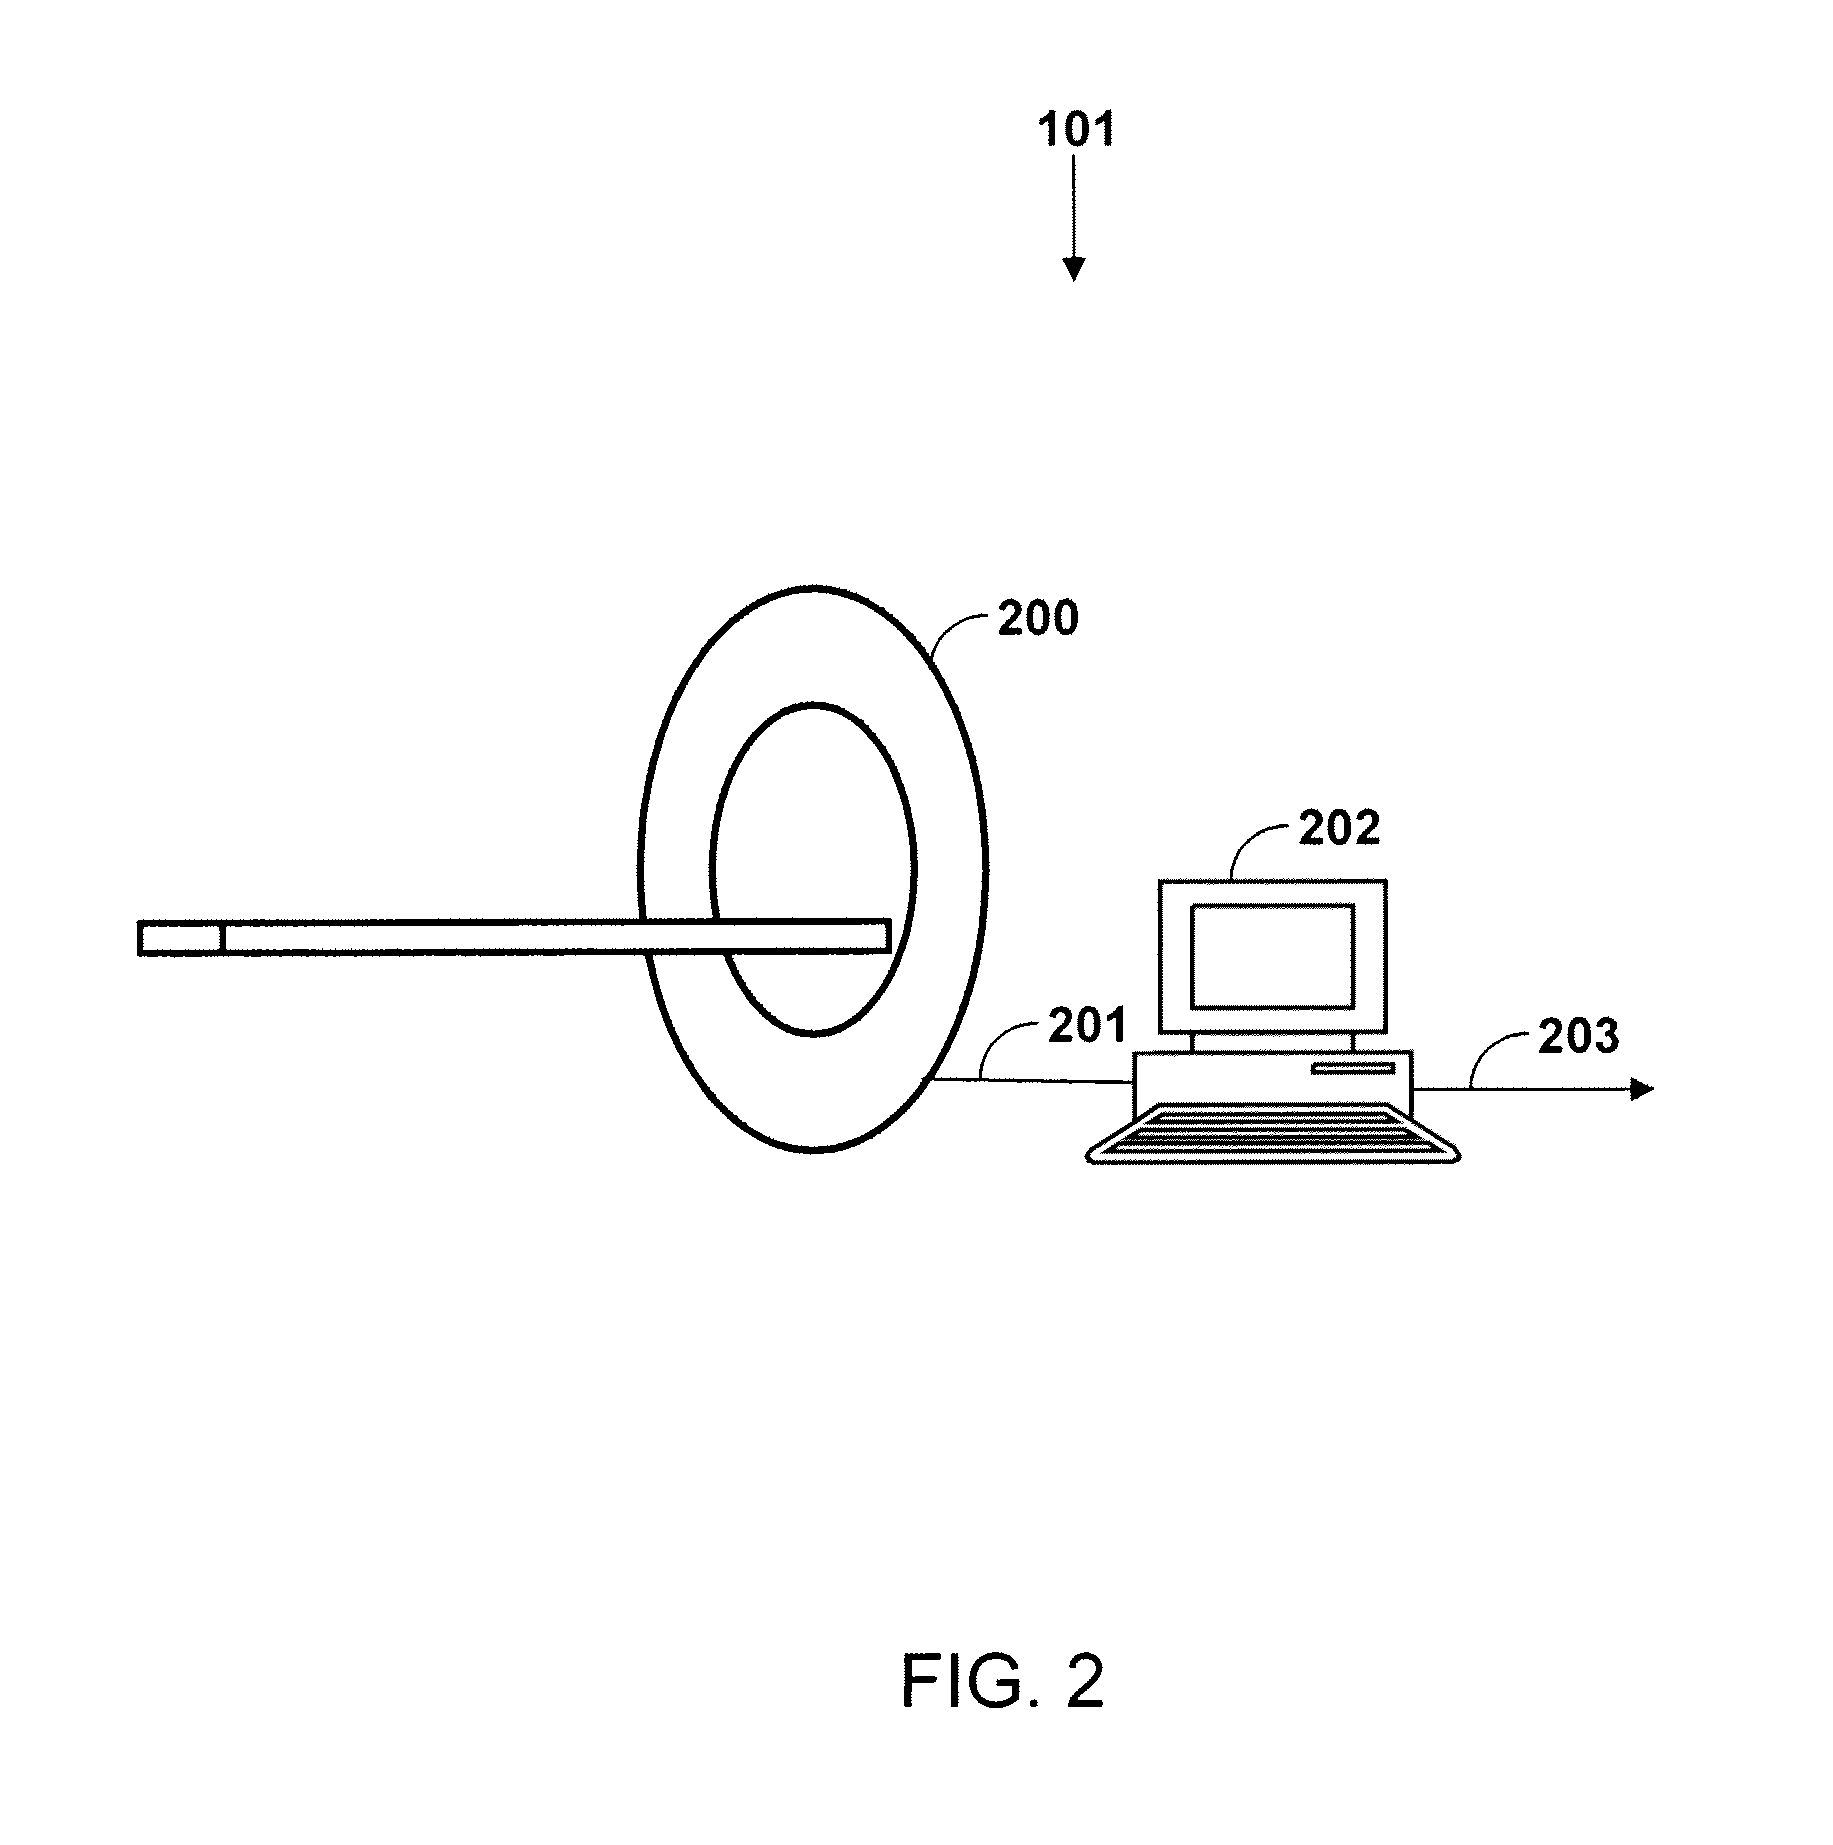 Distributed microwave image processing system and method